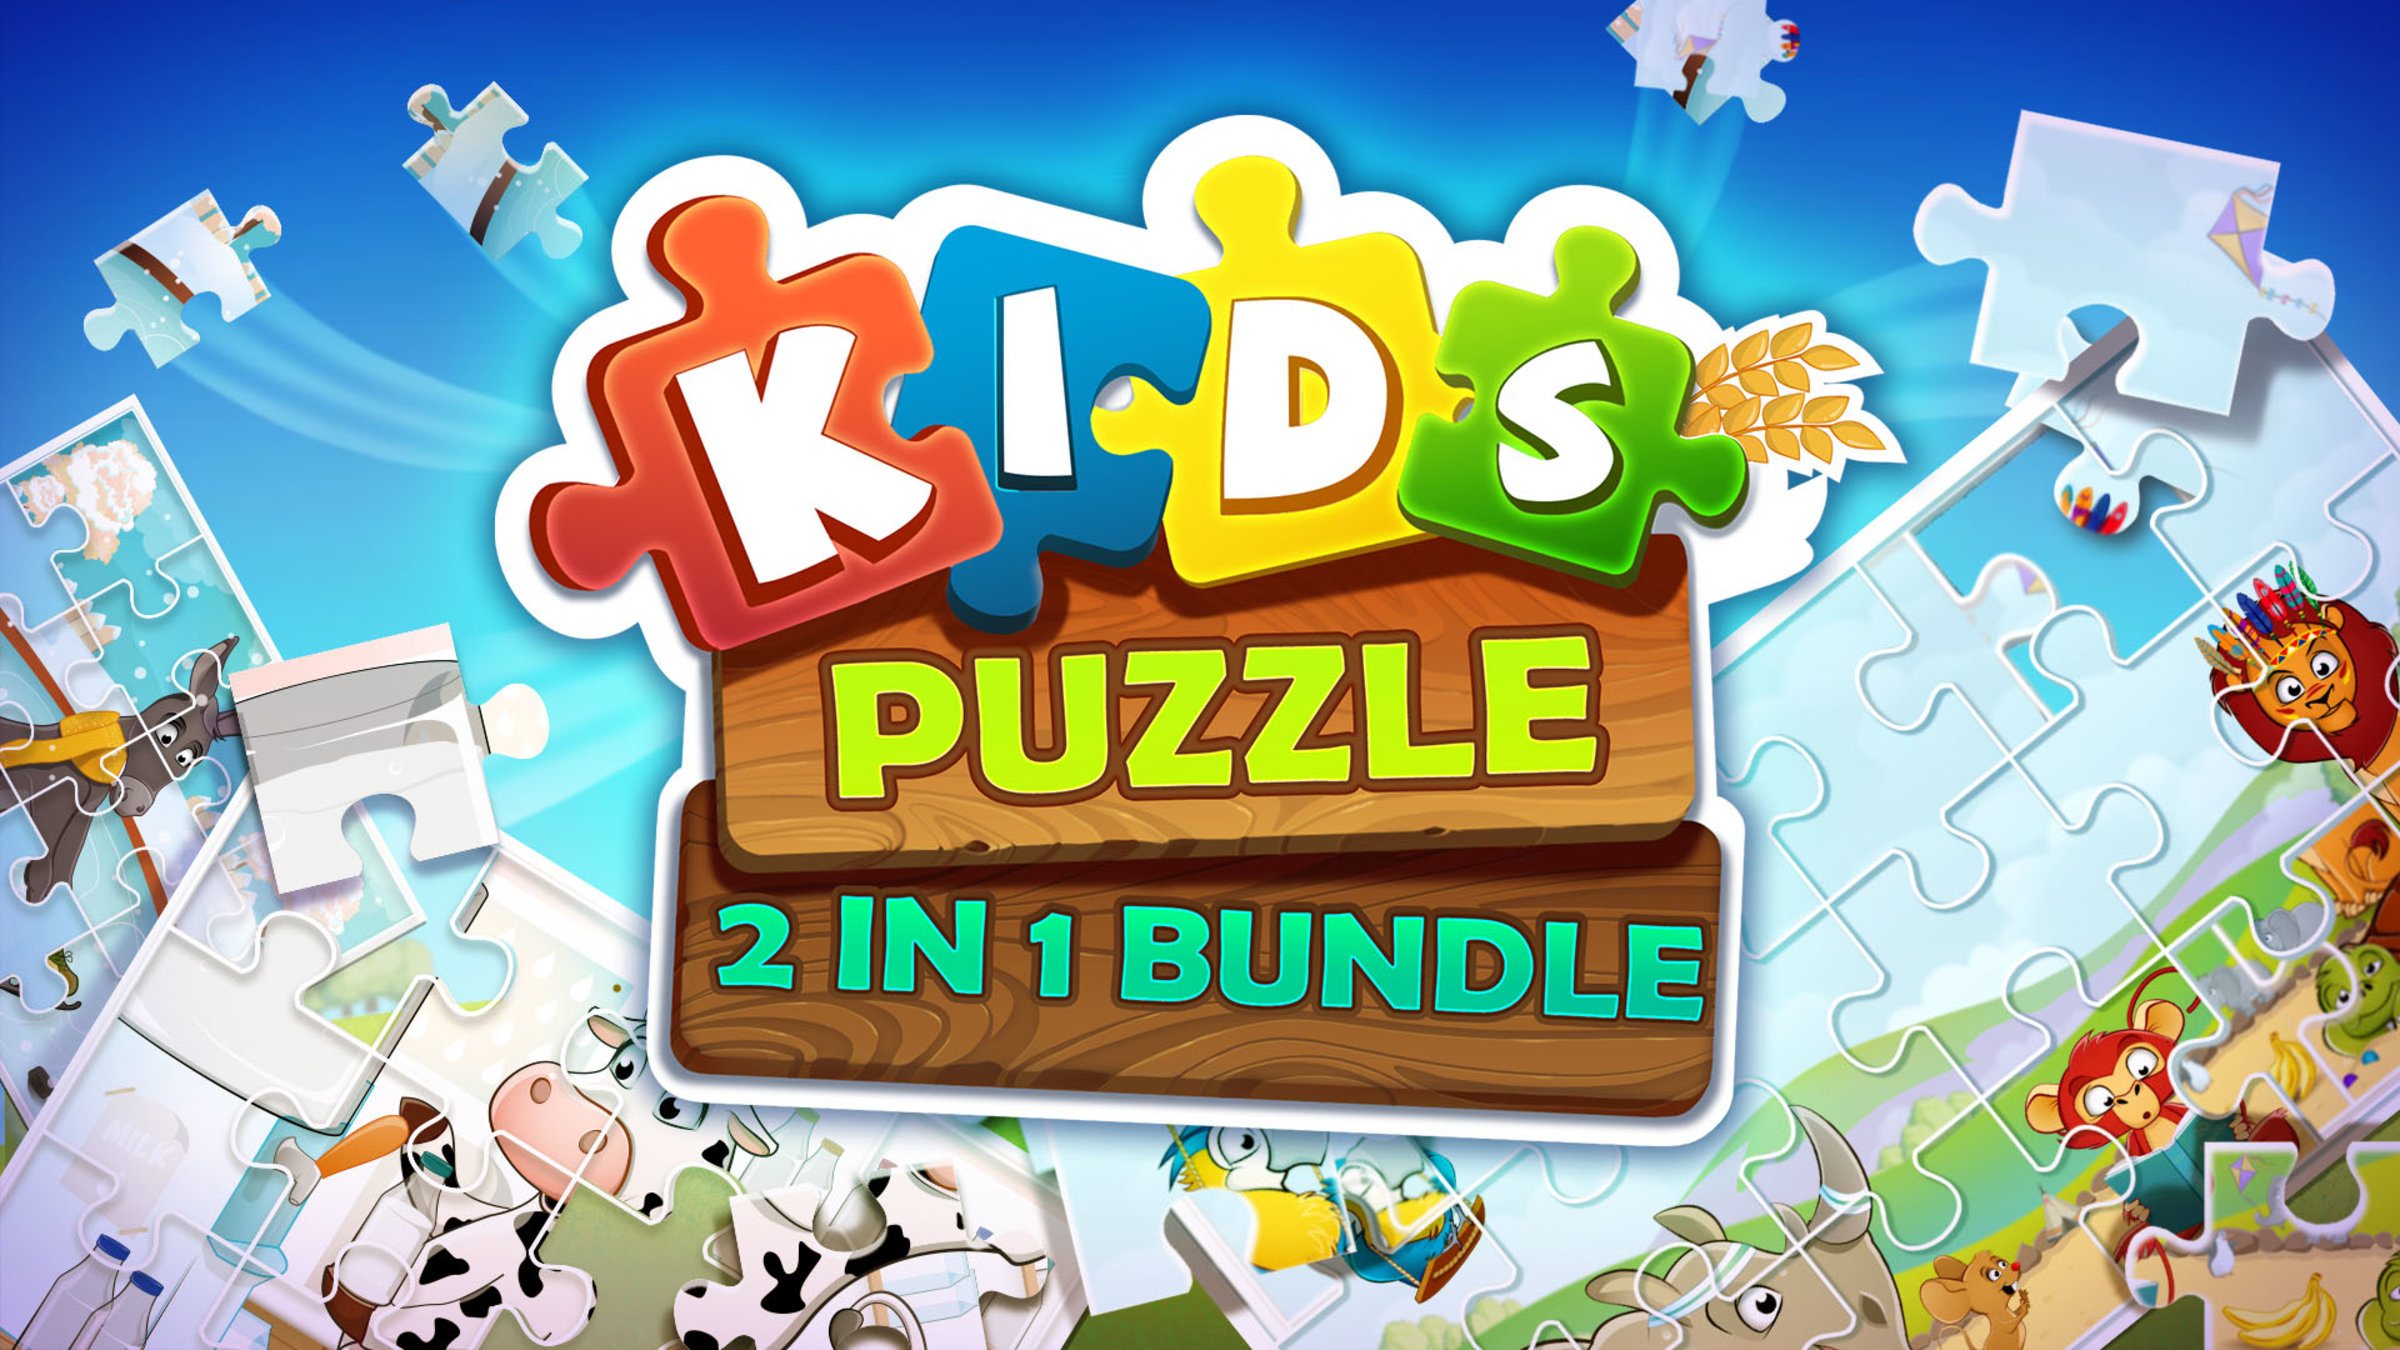 Puzzle Games Bundle (5 in 1) for Nintendo Switch - Nintendo Official Site